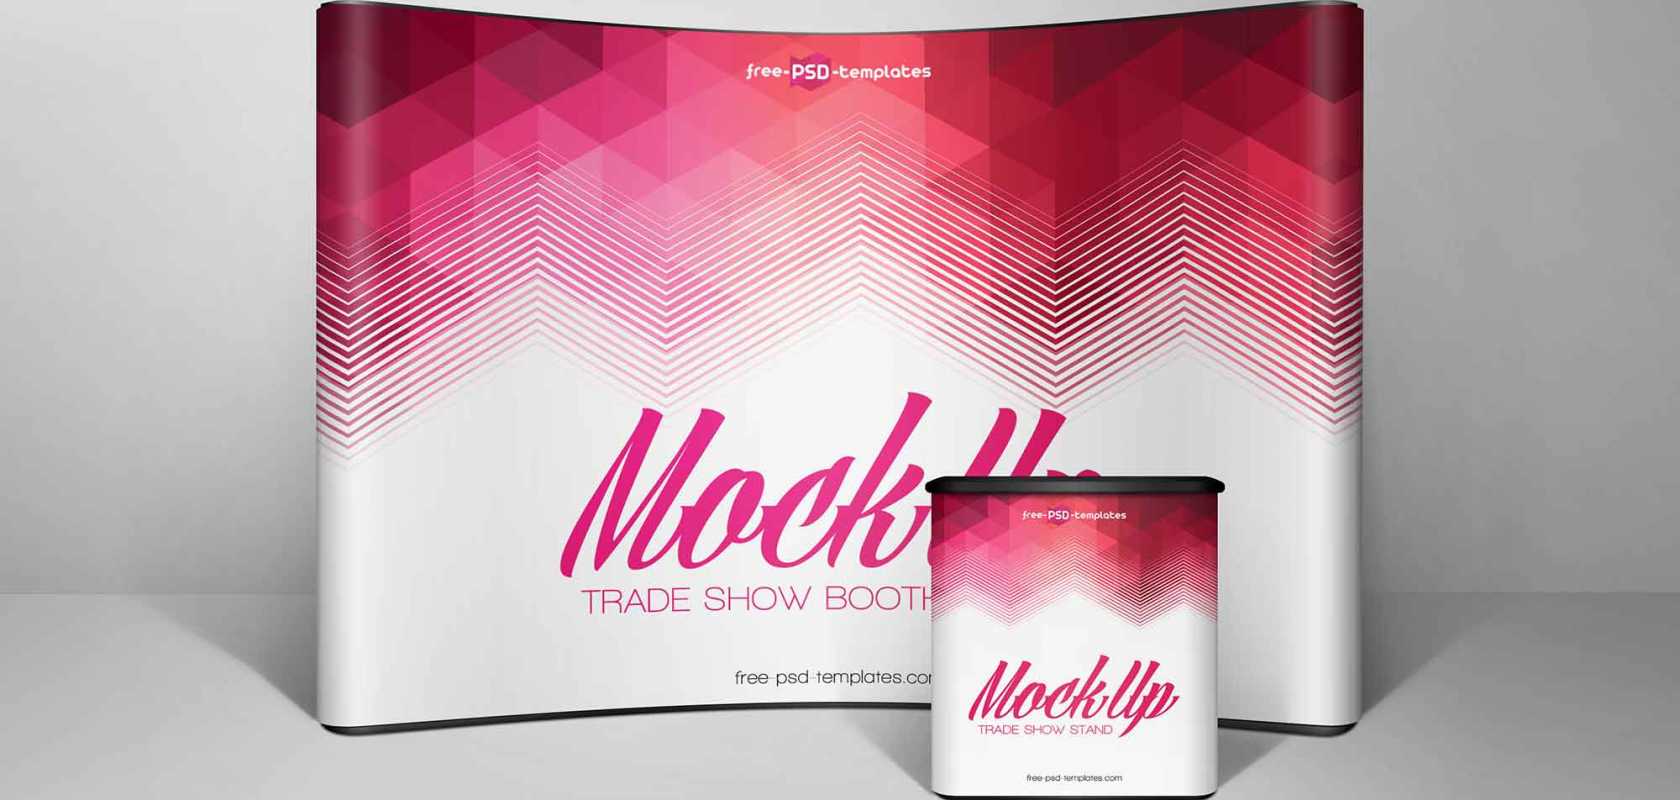 Download Free Trade Show Booth Mockup - Free Mockup Download